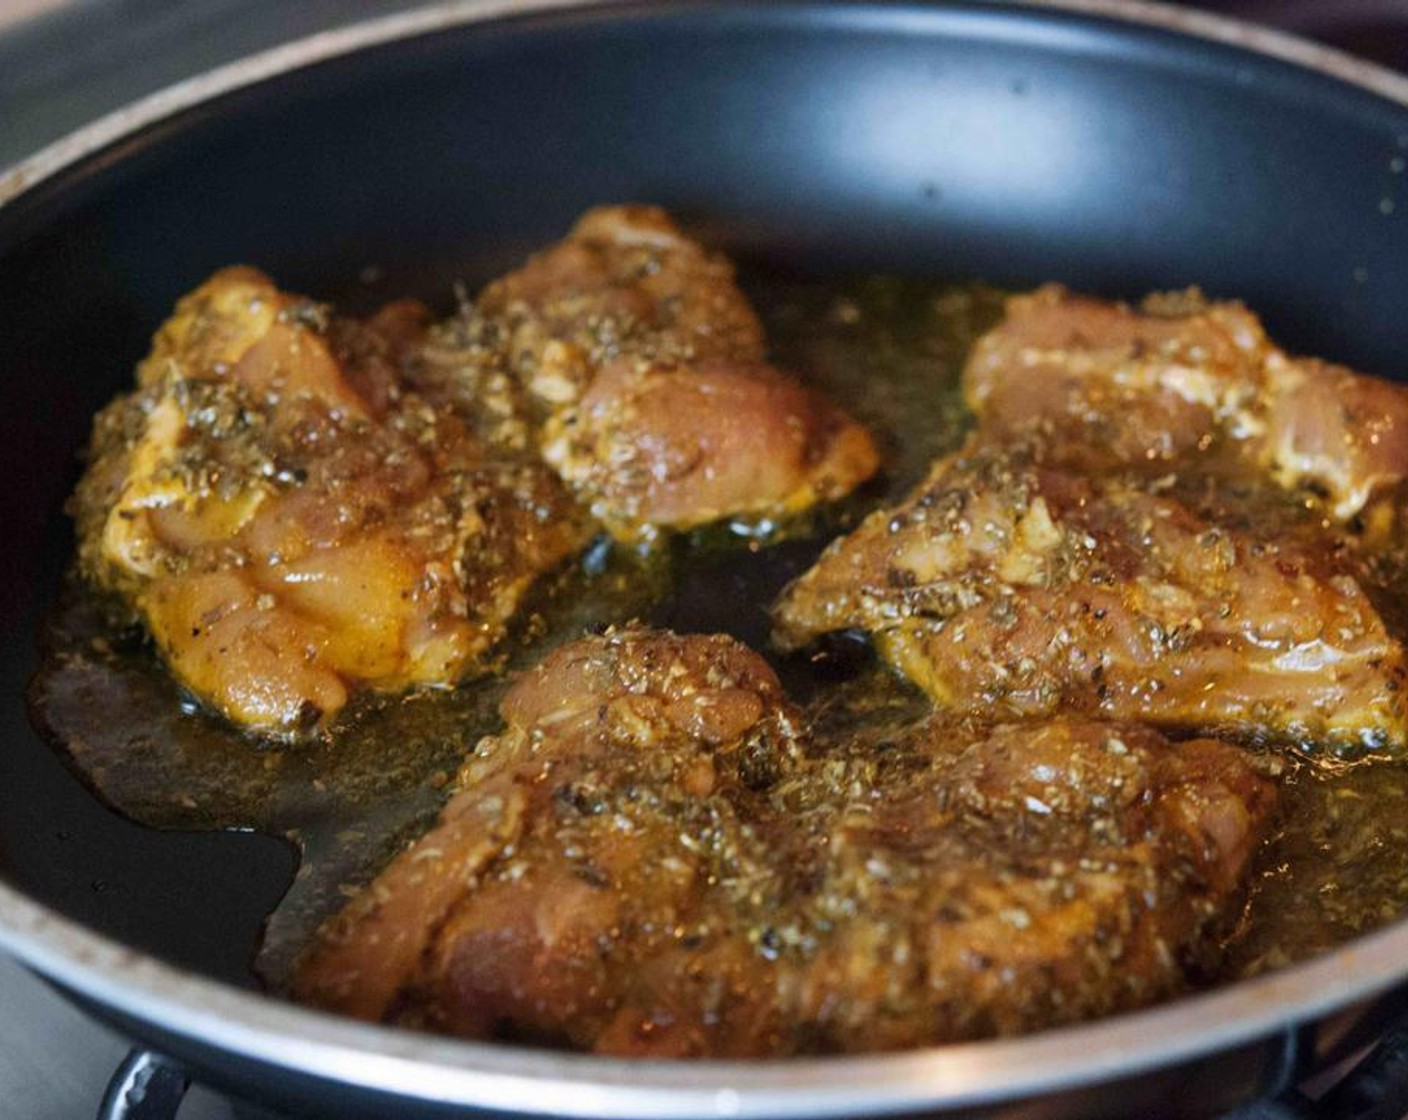 step 4 When ready to cook, heat your skillet on medium and when hot, add the chicken with its marinade. Cook 8 minutes per side or until meat is cooked and outside is nice and crispy.